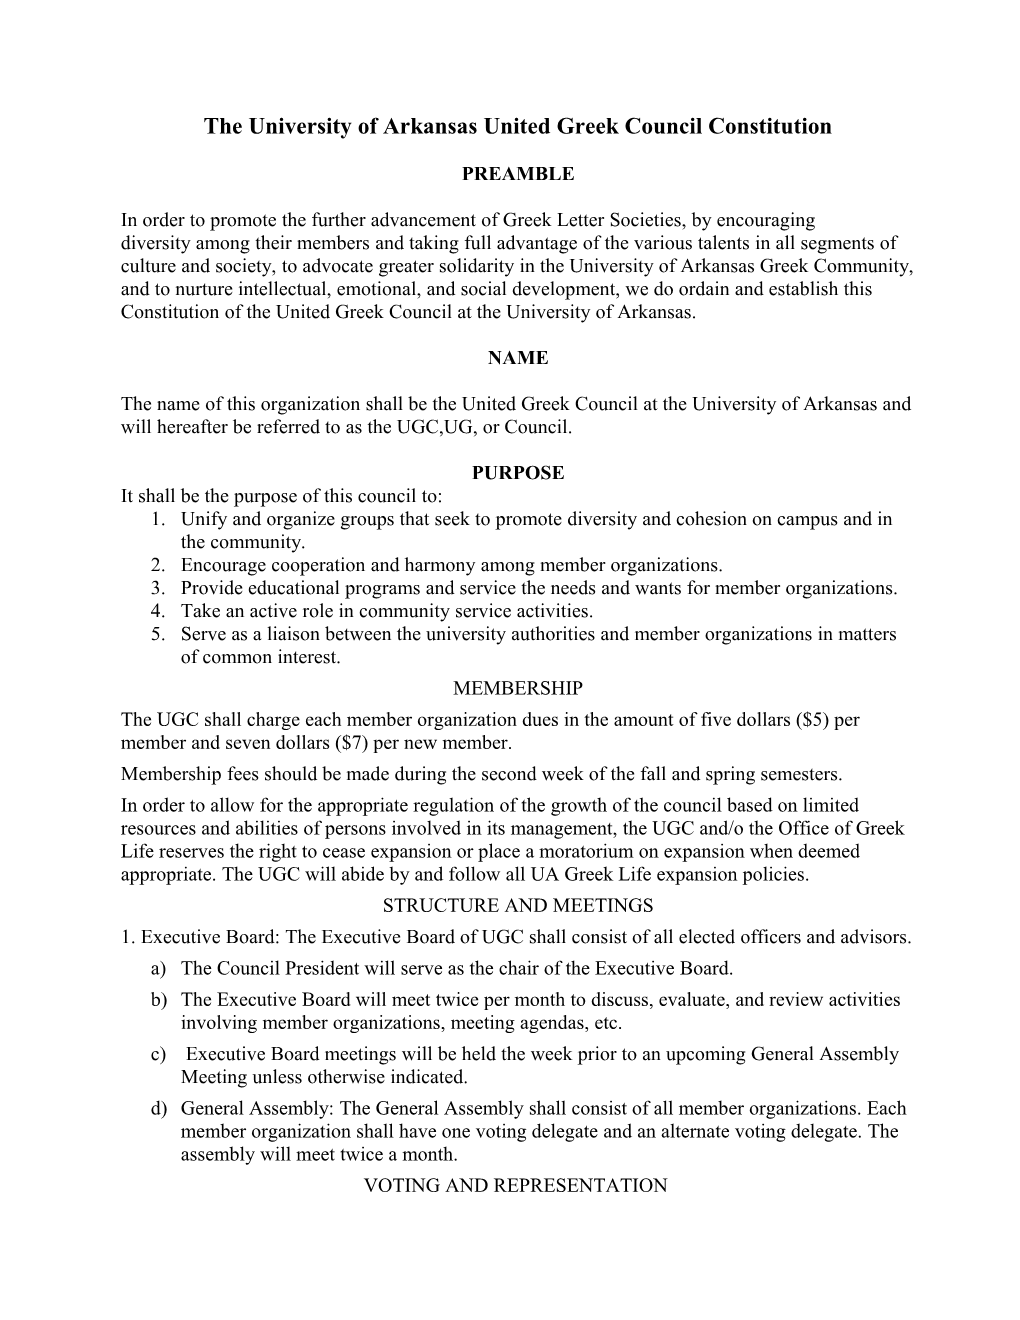 The University of Arkansas United Greek Council Constitution